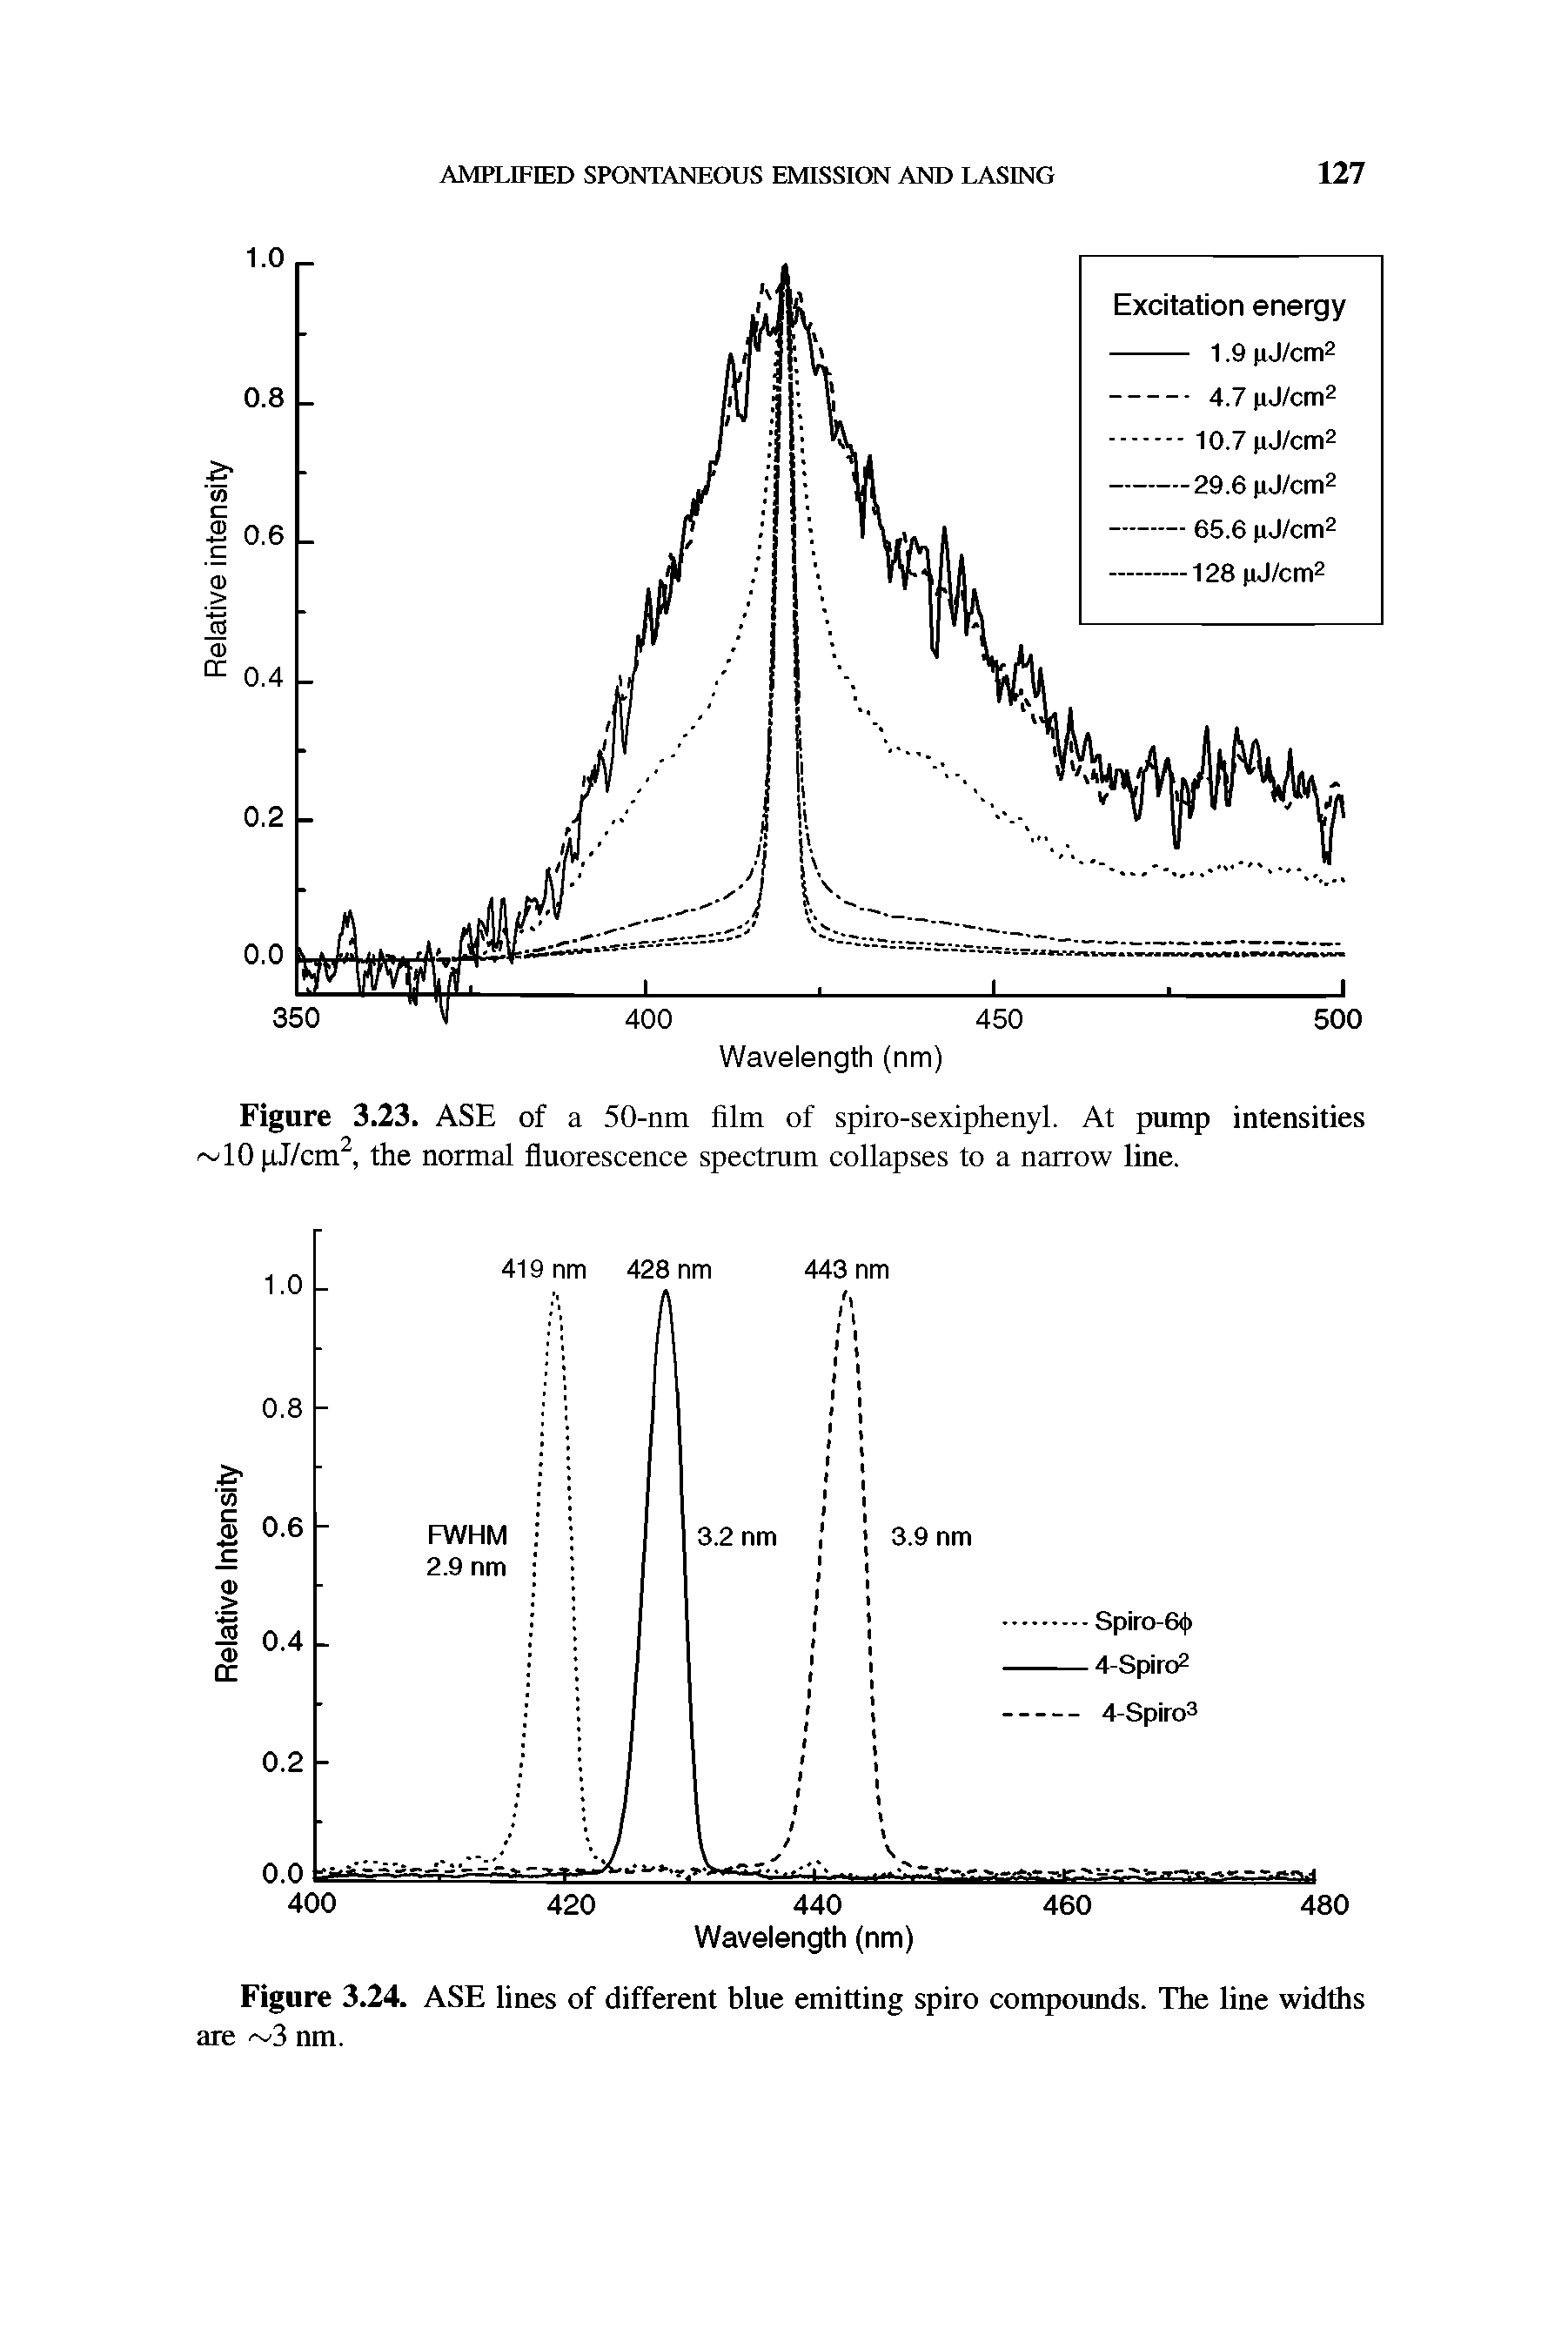 Figure 3.23. ASE of a 50-nm film of spiro-sexiphenyl. At pump intensities 40 pJ/cm2, the normal fluorescence spectrum collapses to a narrow line.